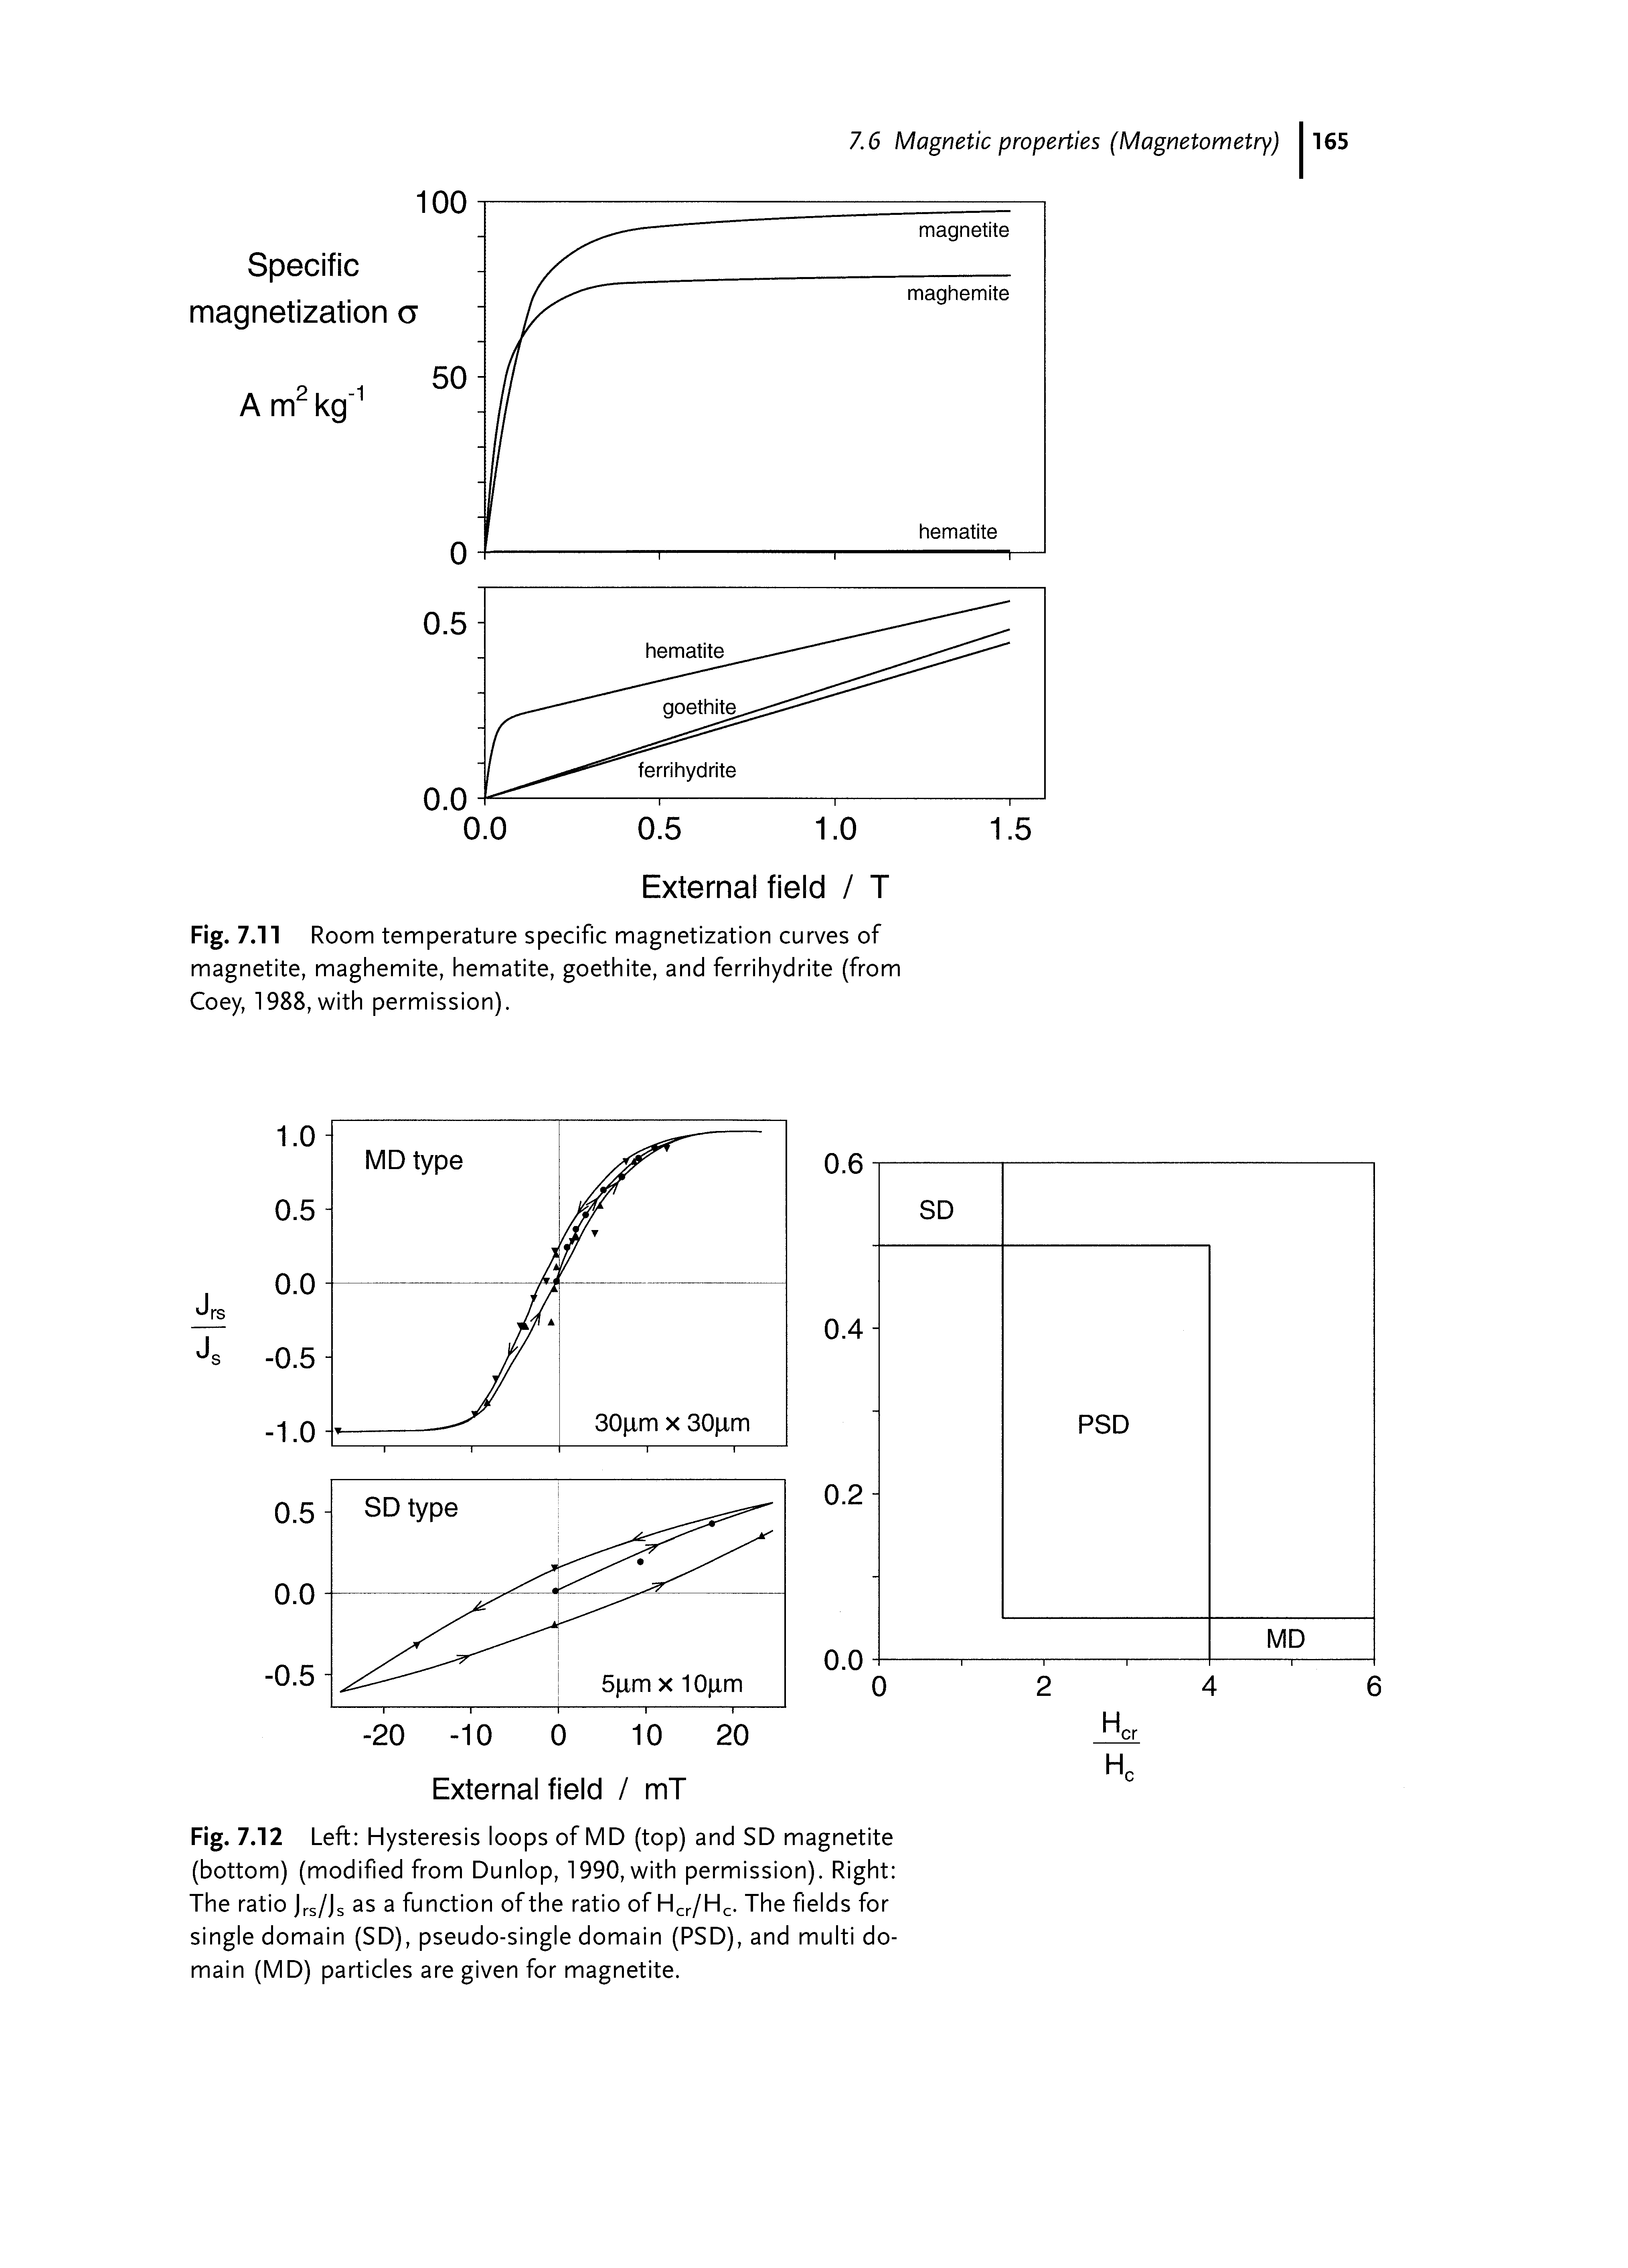 Fig. 7.11 Room temperature specific magnetization curves of magnetite, maghemite, hematite, goethite, and ferrihydrite (from Coey, 1988, with permission).